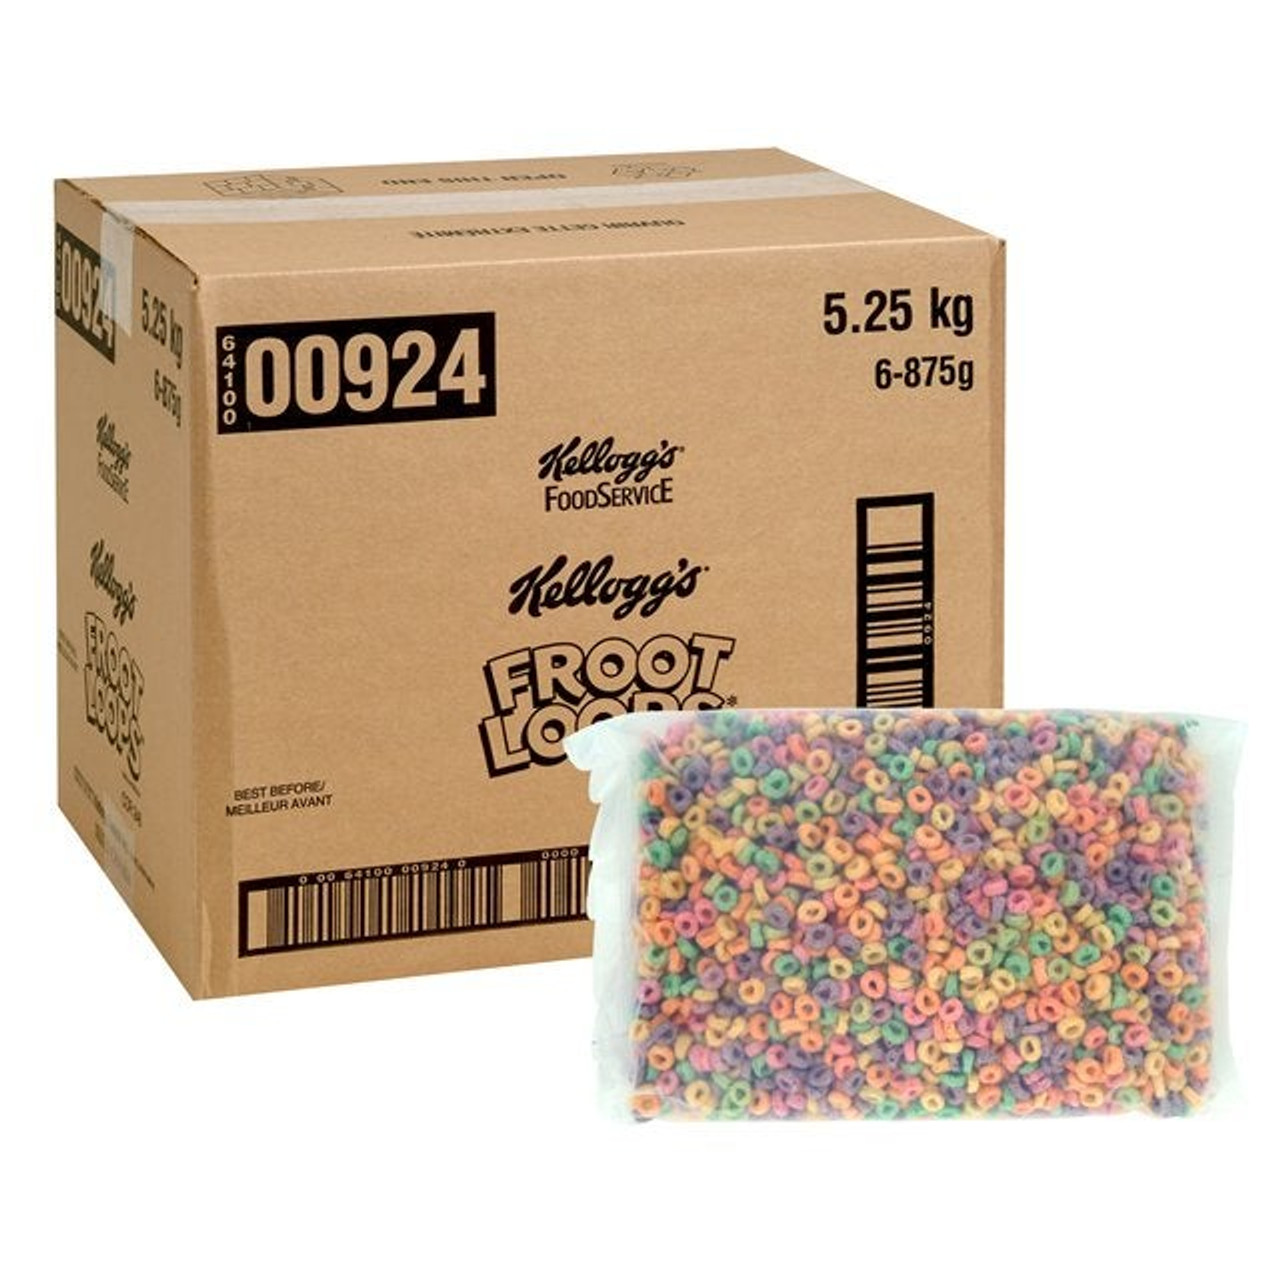 Kellogg's Froot Loop Cereal, Pouch, Trans Fat Compliant | 875G/Unit, 6 Units/Case